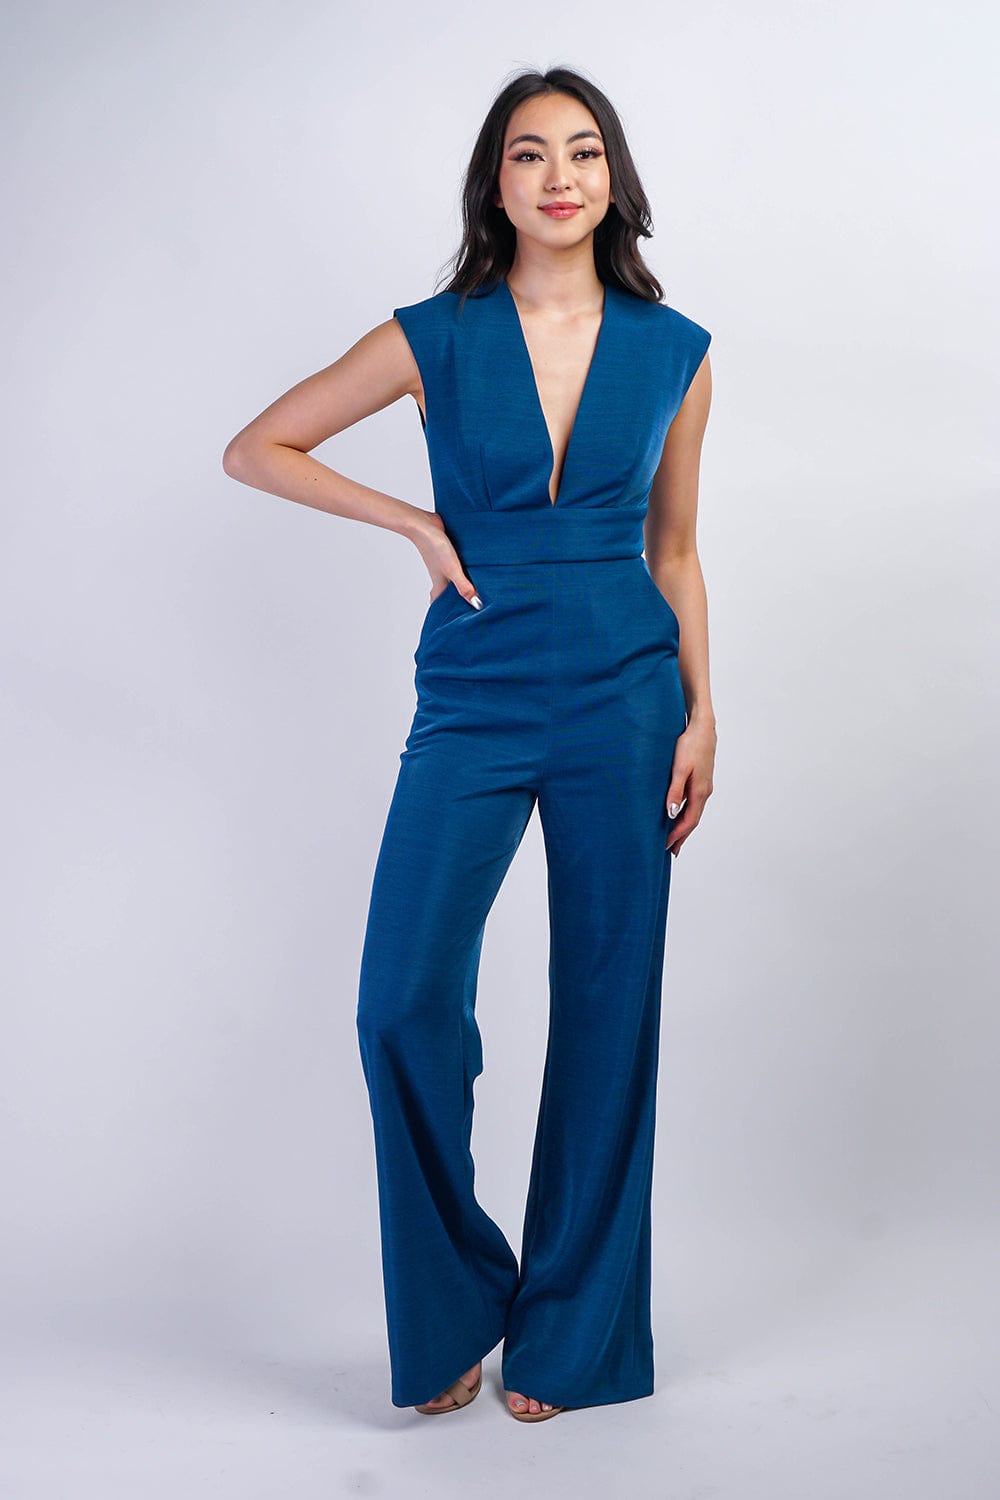 Chloe Dao JUMPSUITS & ROMPERS Saphire Blue Luxe V Neck Aiden Jumpsuit